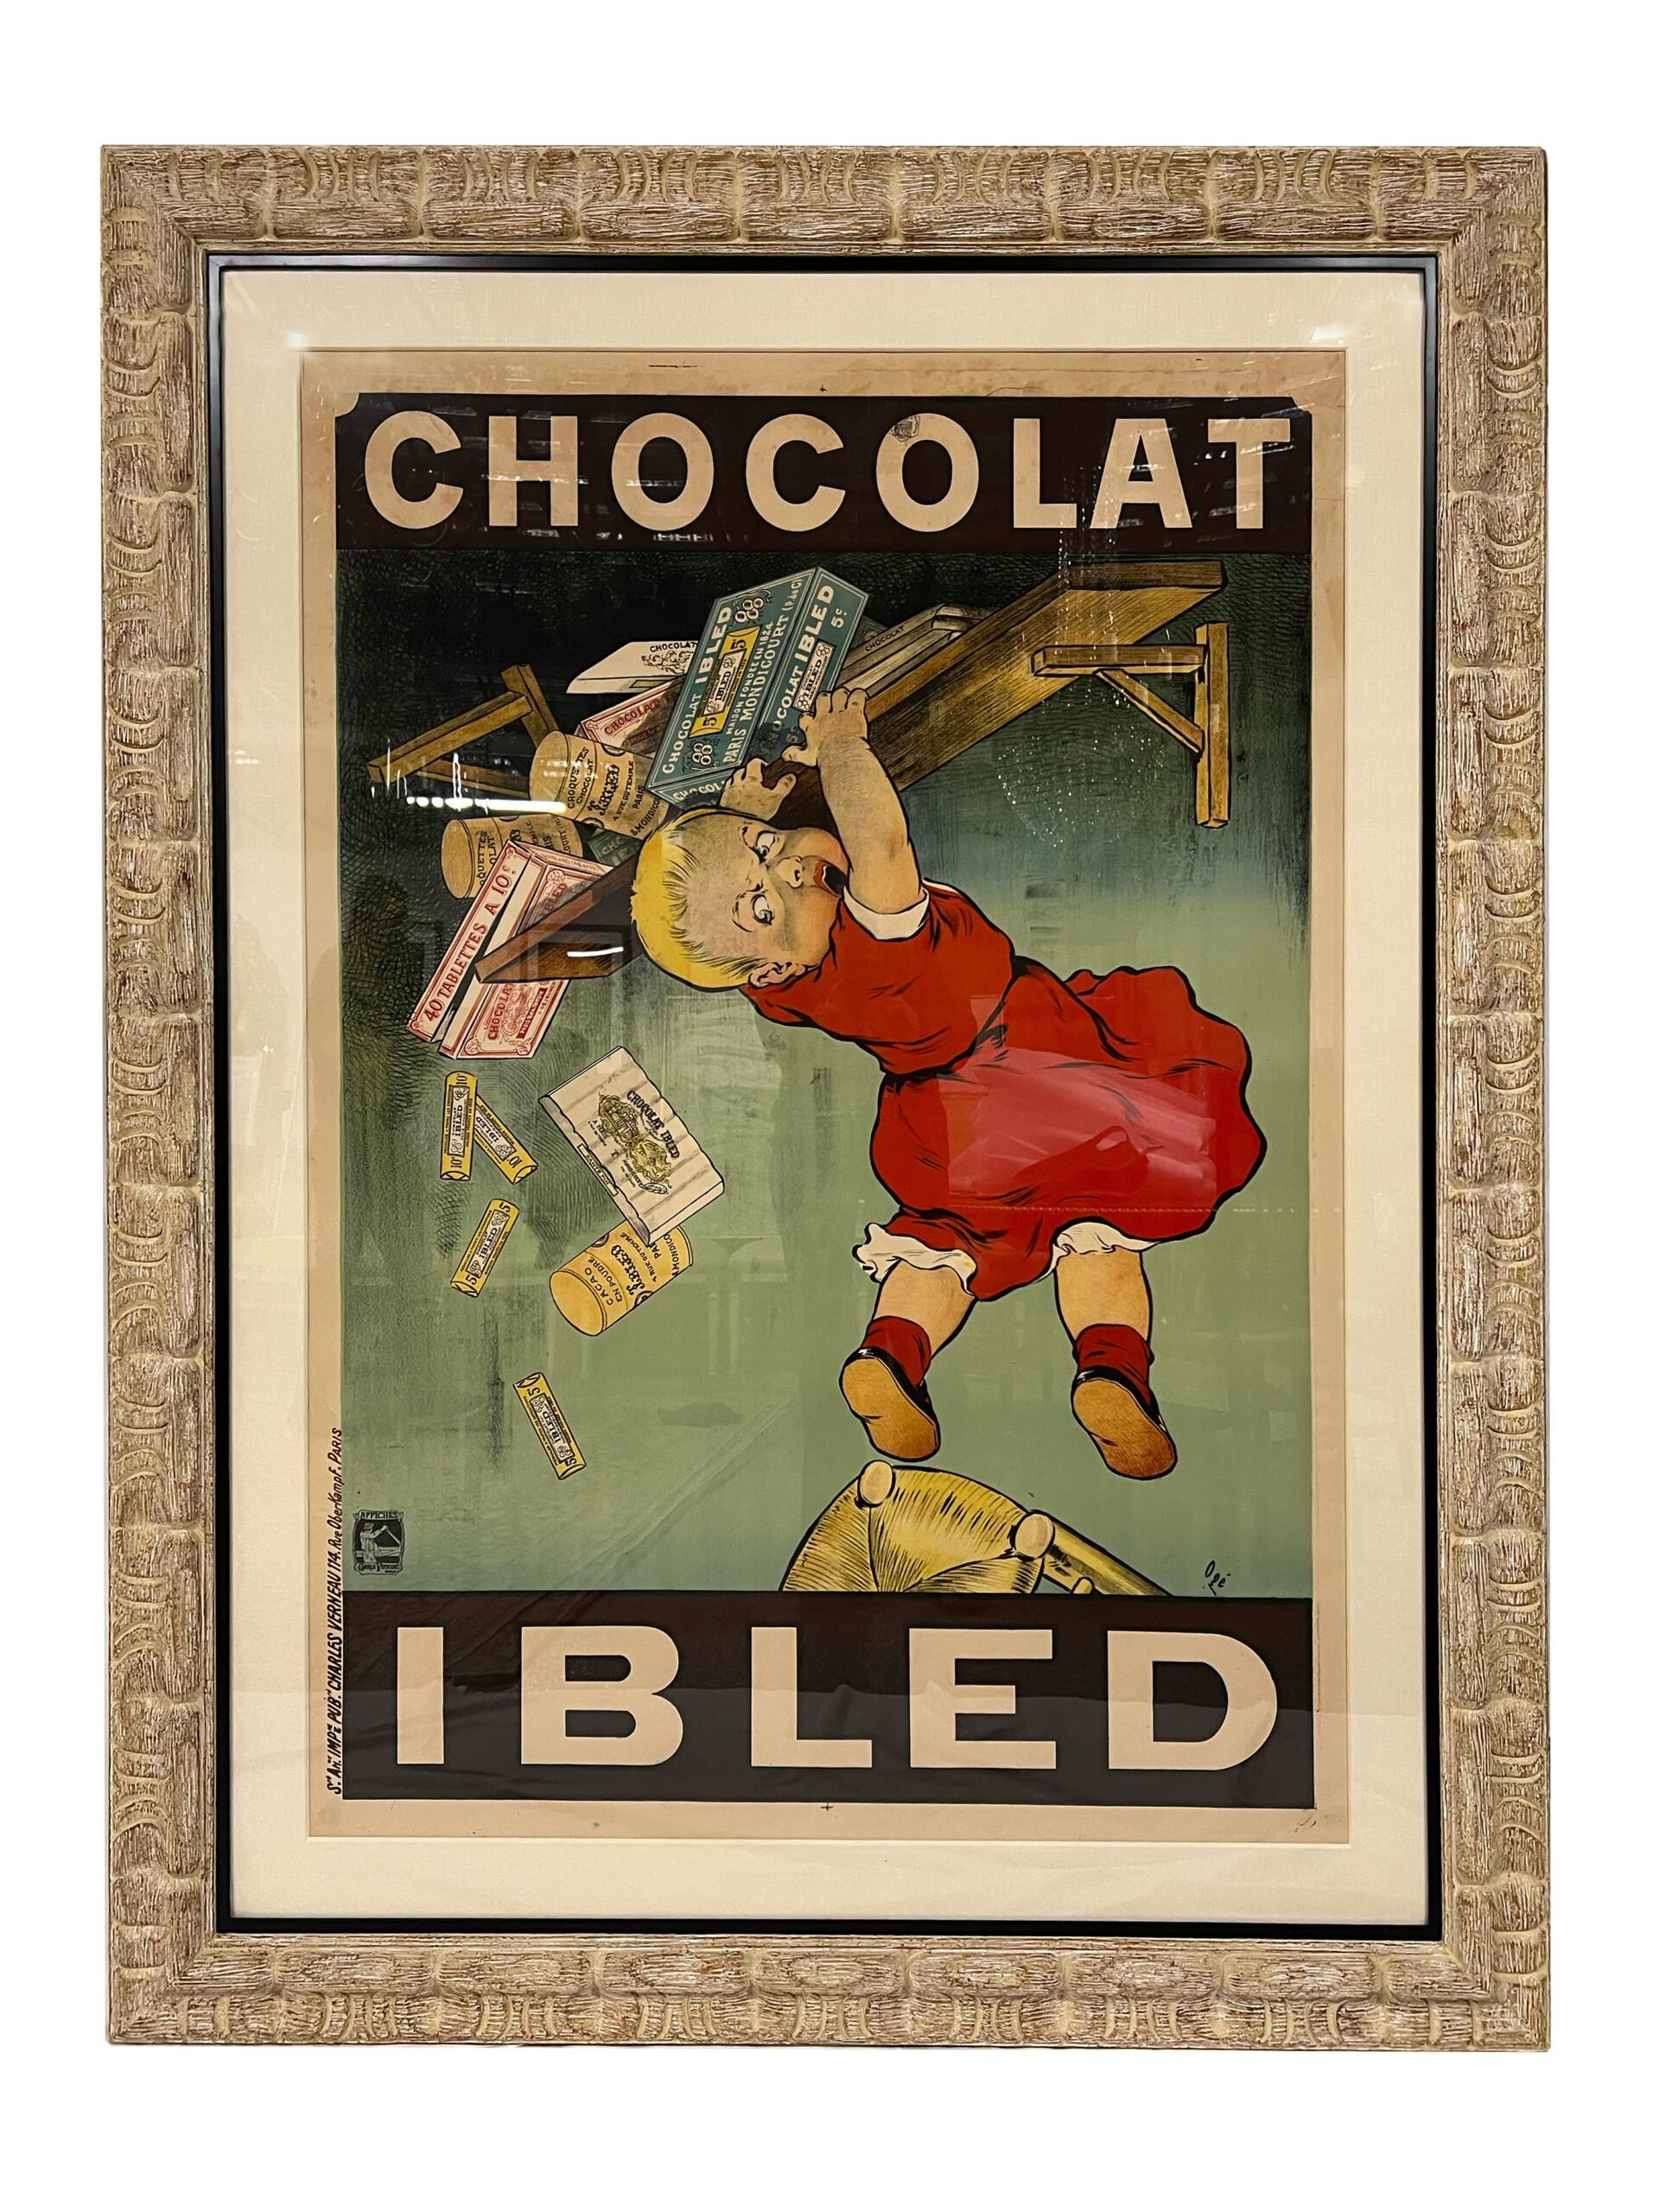 Dimensions with frame: 54? x 70?
Artist: Eugène Ogé
Medium: Original stone Lithograph vintage poster

c. 1900

A charming children poster, realized by Oge, advertising “Chocolat Ibled” shows how irresistible the product is to children. Ogé